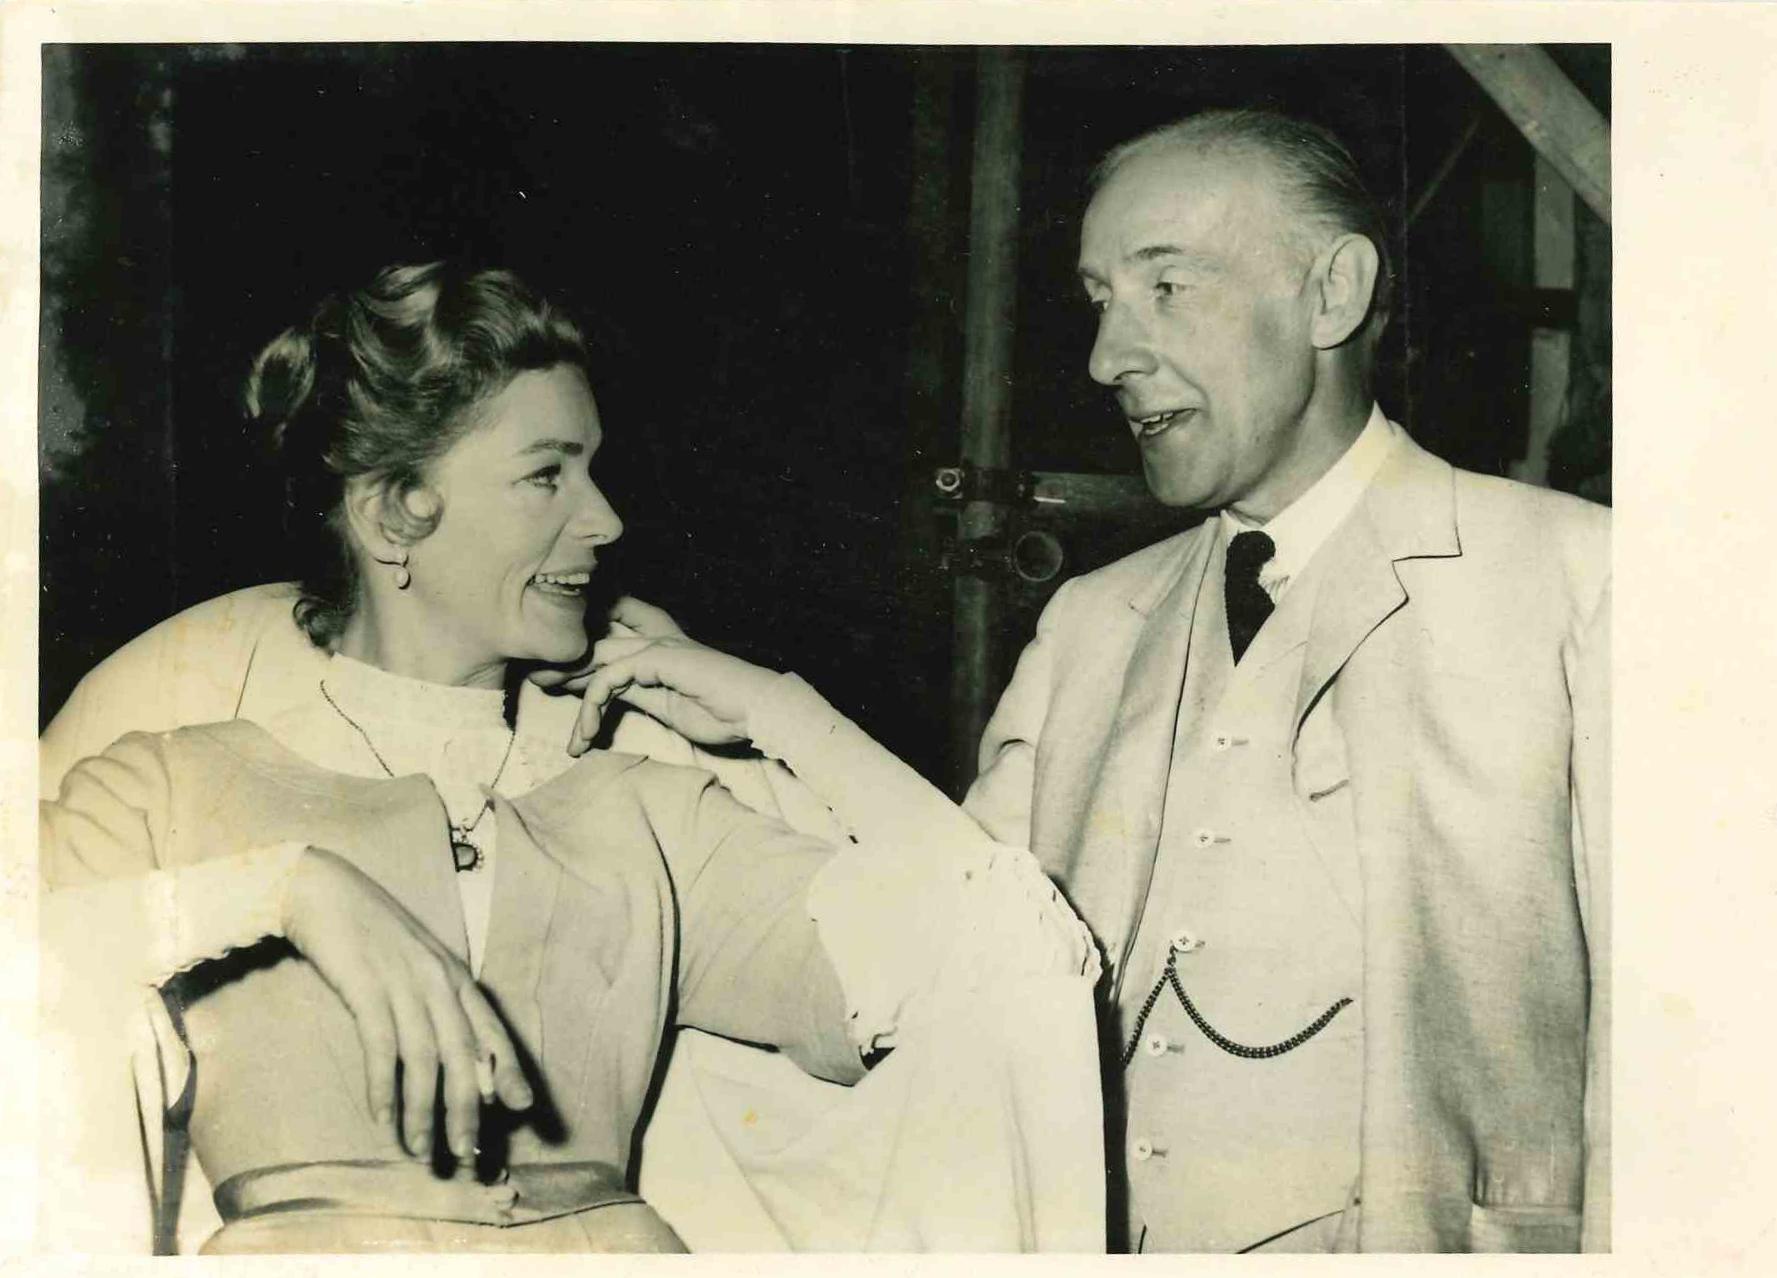 Unknown Portrait Photograph - Lauren Bacall and Wilfred Hyde - Vintage Photo - 1960s